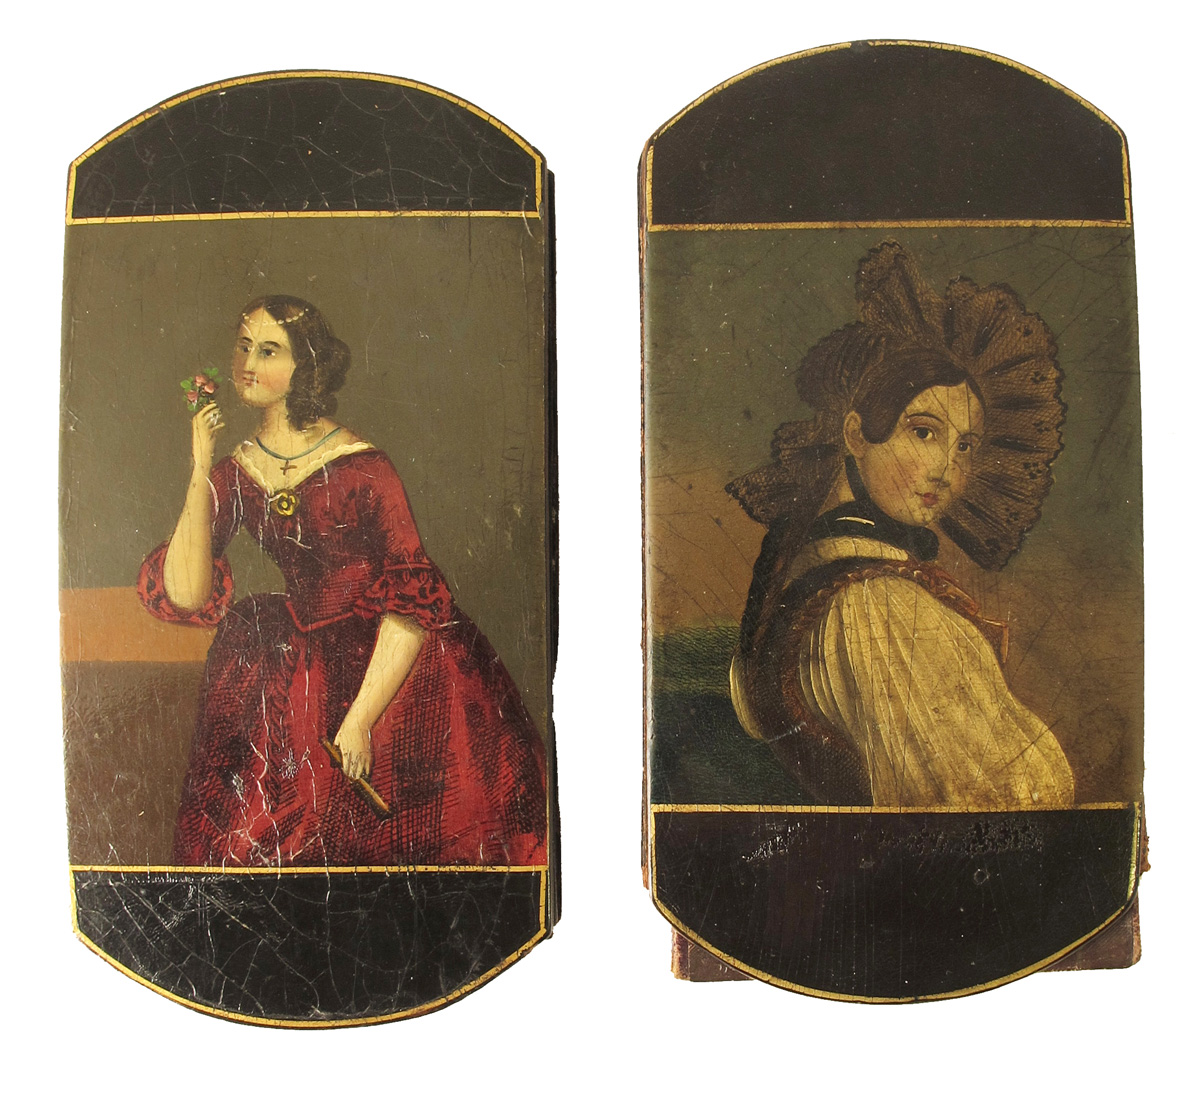 Two 19th century papier-mâché spectacle cases, each with a leather gusset, one painted with a lady